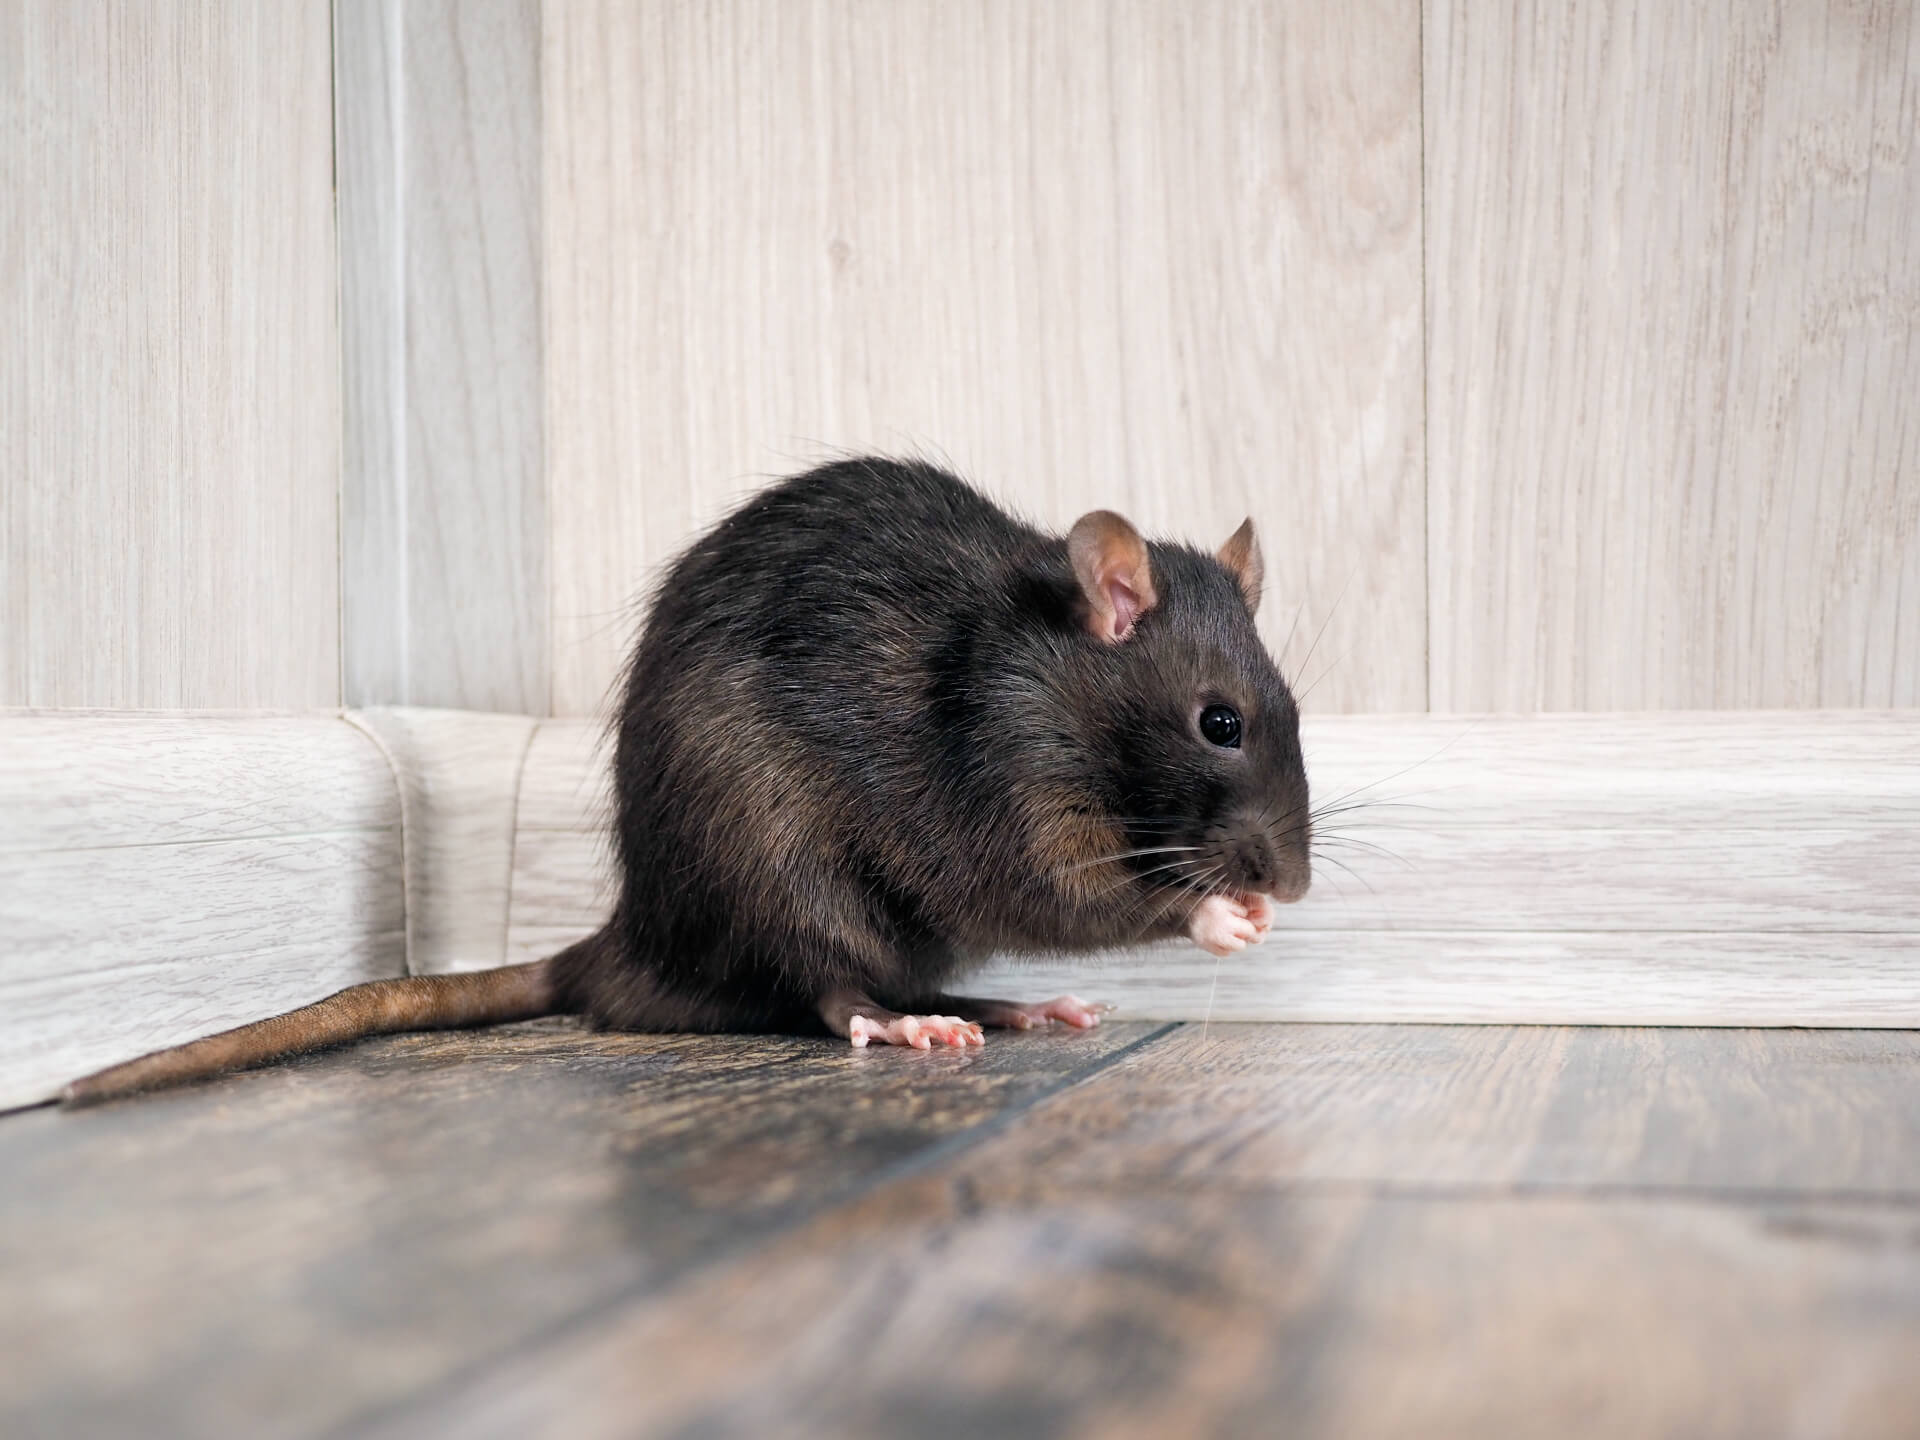 Signs of Rodents in Your Home